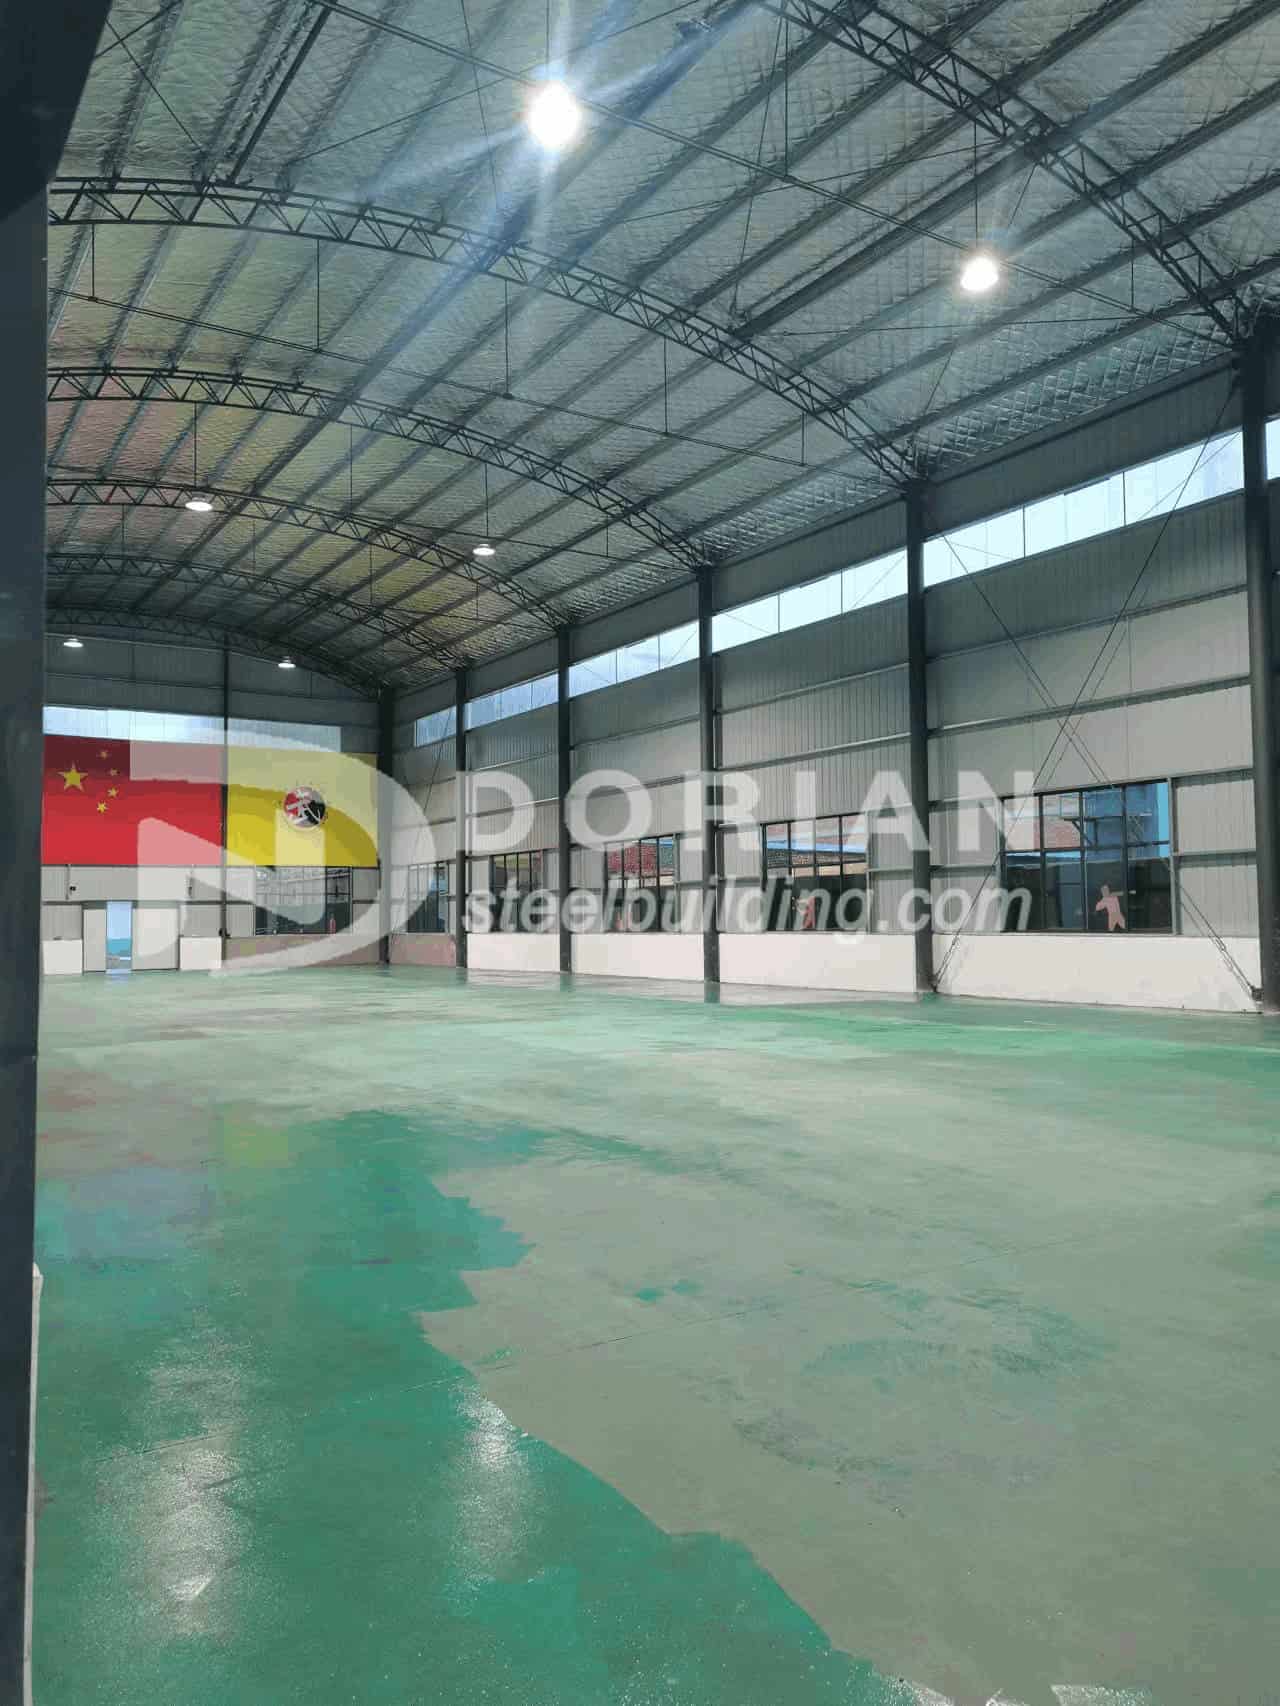 1260 Square Meters Steel Structure Commercial Building Kongfu school In Luoyang China 6